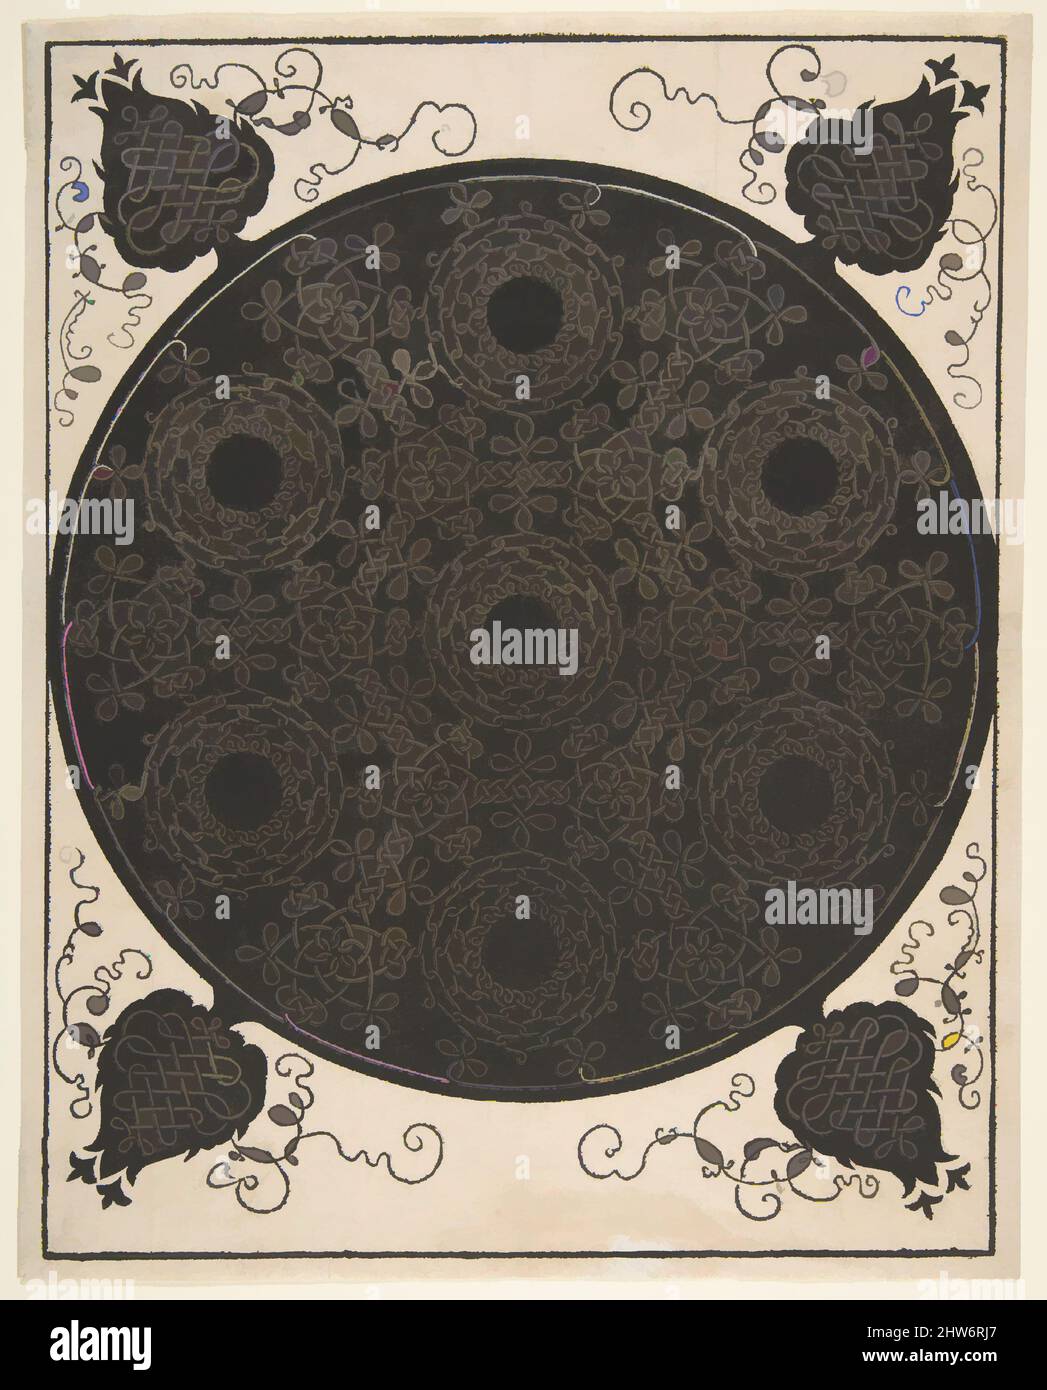 Art inspired by “The Sixth Knot”. Interlaced Roundel with Seven Wreaths, 1521 before, Woodcut, sheet: 10 15/16 x 8 11/16 in. (27.8 x 22.1 cm), Albrecht Dürer (German, Nuremberg 1471–1528 Nuremberg), After Leonardo da Vinci (Italian, Vinci 1452–1519 Amboise) (or workshop), Embroidery, Classic works modernized by Artotop with a splash of modernity. Shapes, color and value, eye-catching visual impact on art. Emotions through freedom of artworks in a contemporary way. A timeless message pursuing a wildly creative new direction. Artists turning to the digital medium and creating the Artotop NFT Stock Photo